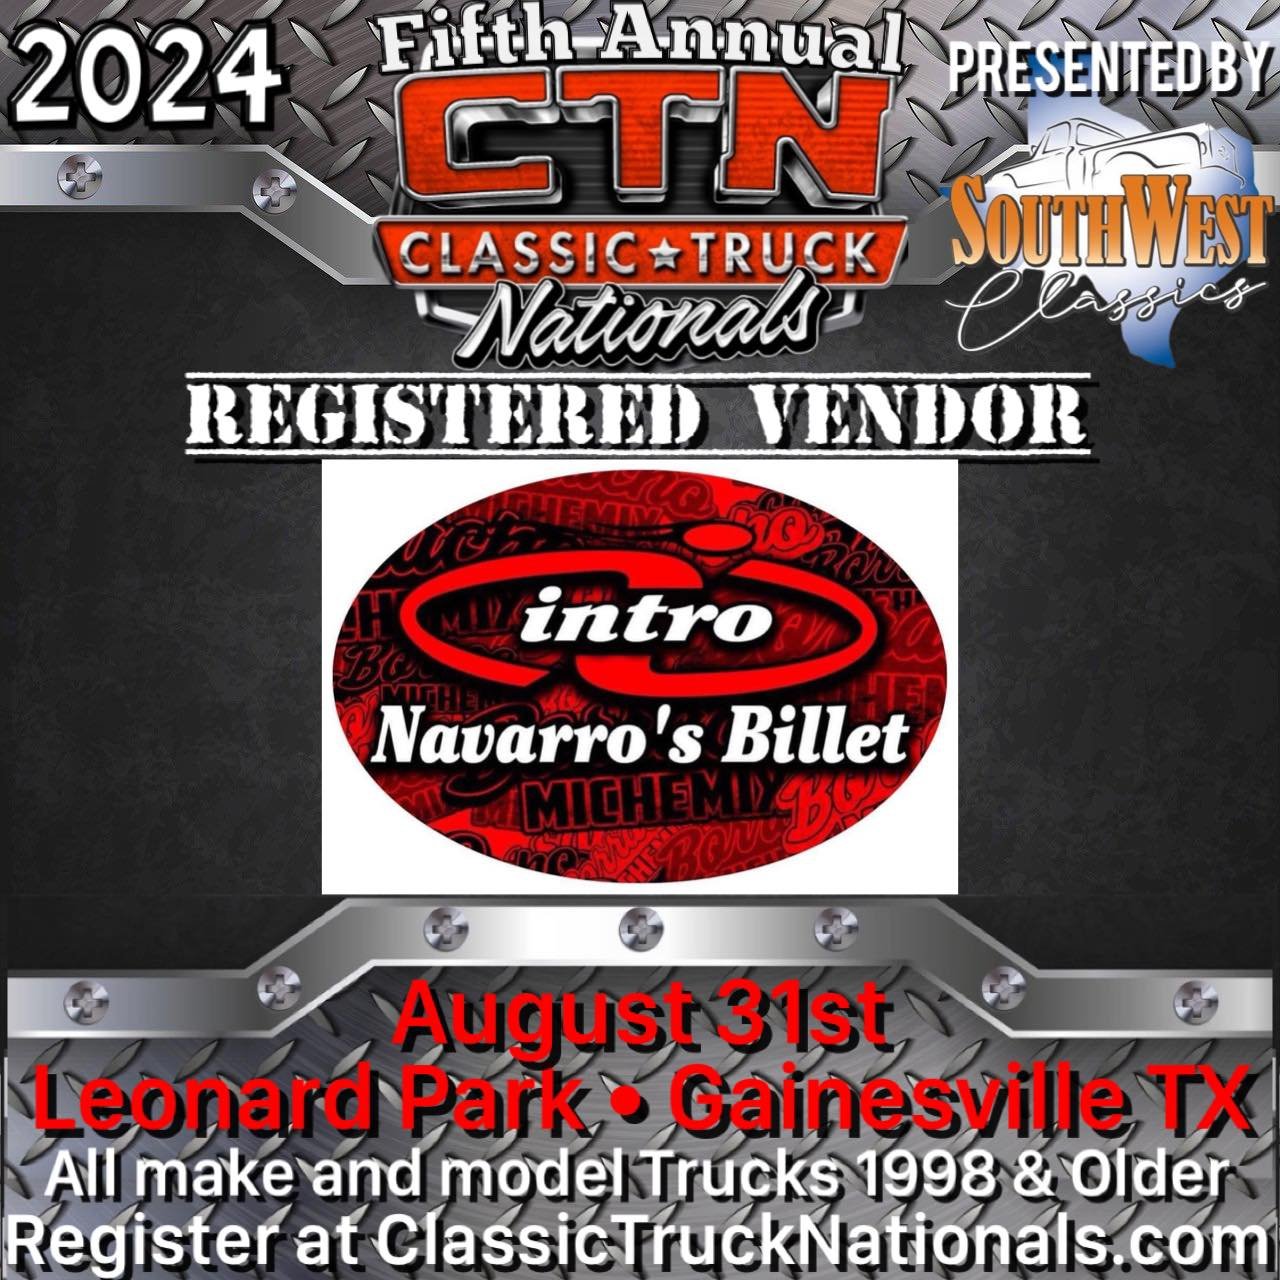 Navarro'S Billet will be joining us for Classic Truck Nationals 2024! Be sure to stop by their booth and check them out!